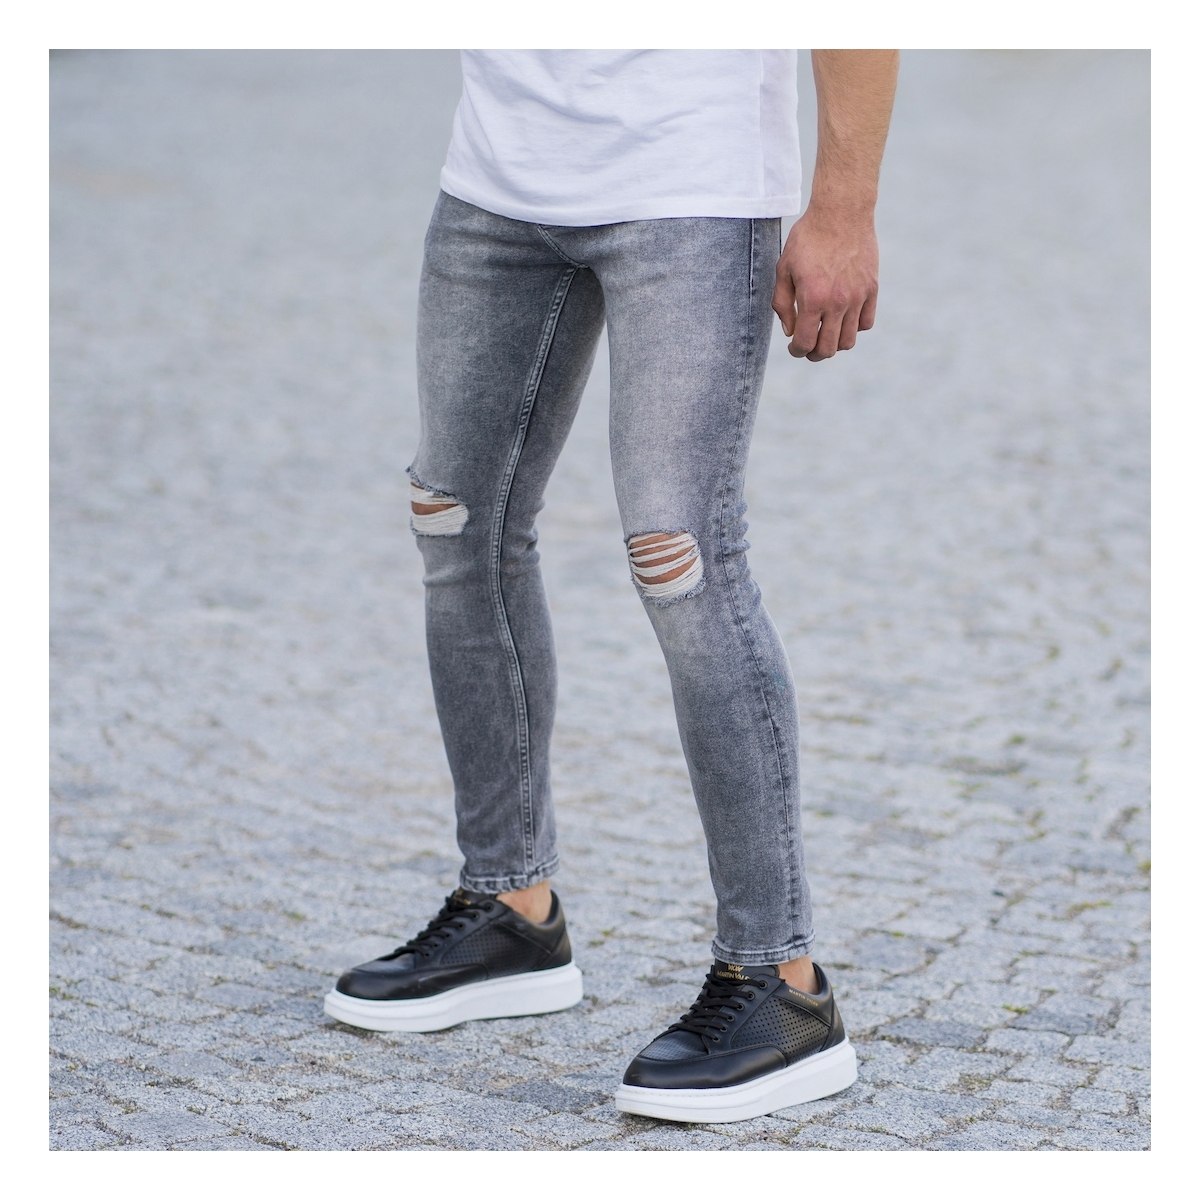 Men's Distorted Leg Skinny Jeans In Anthracite - 6